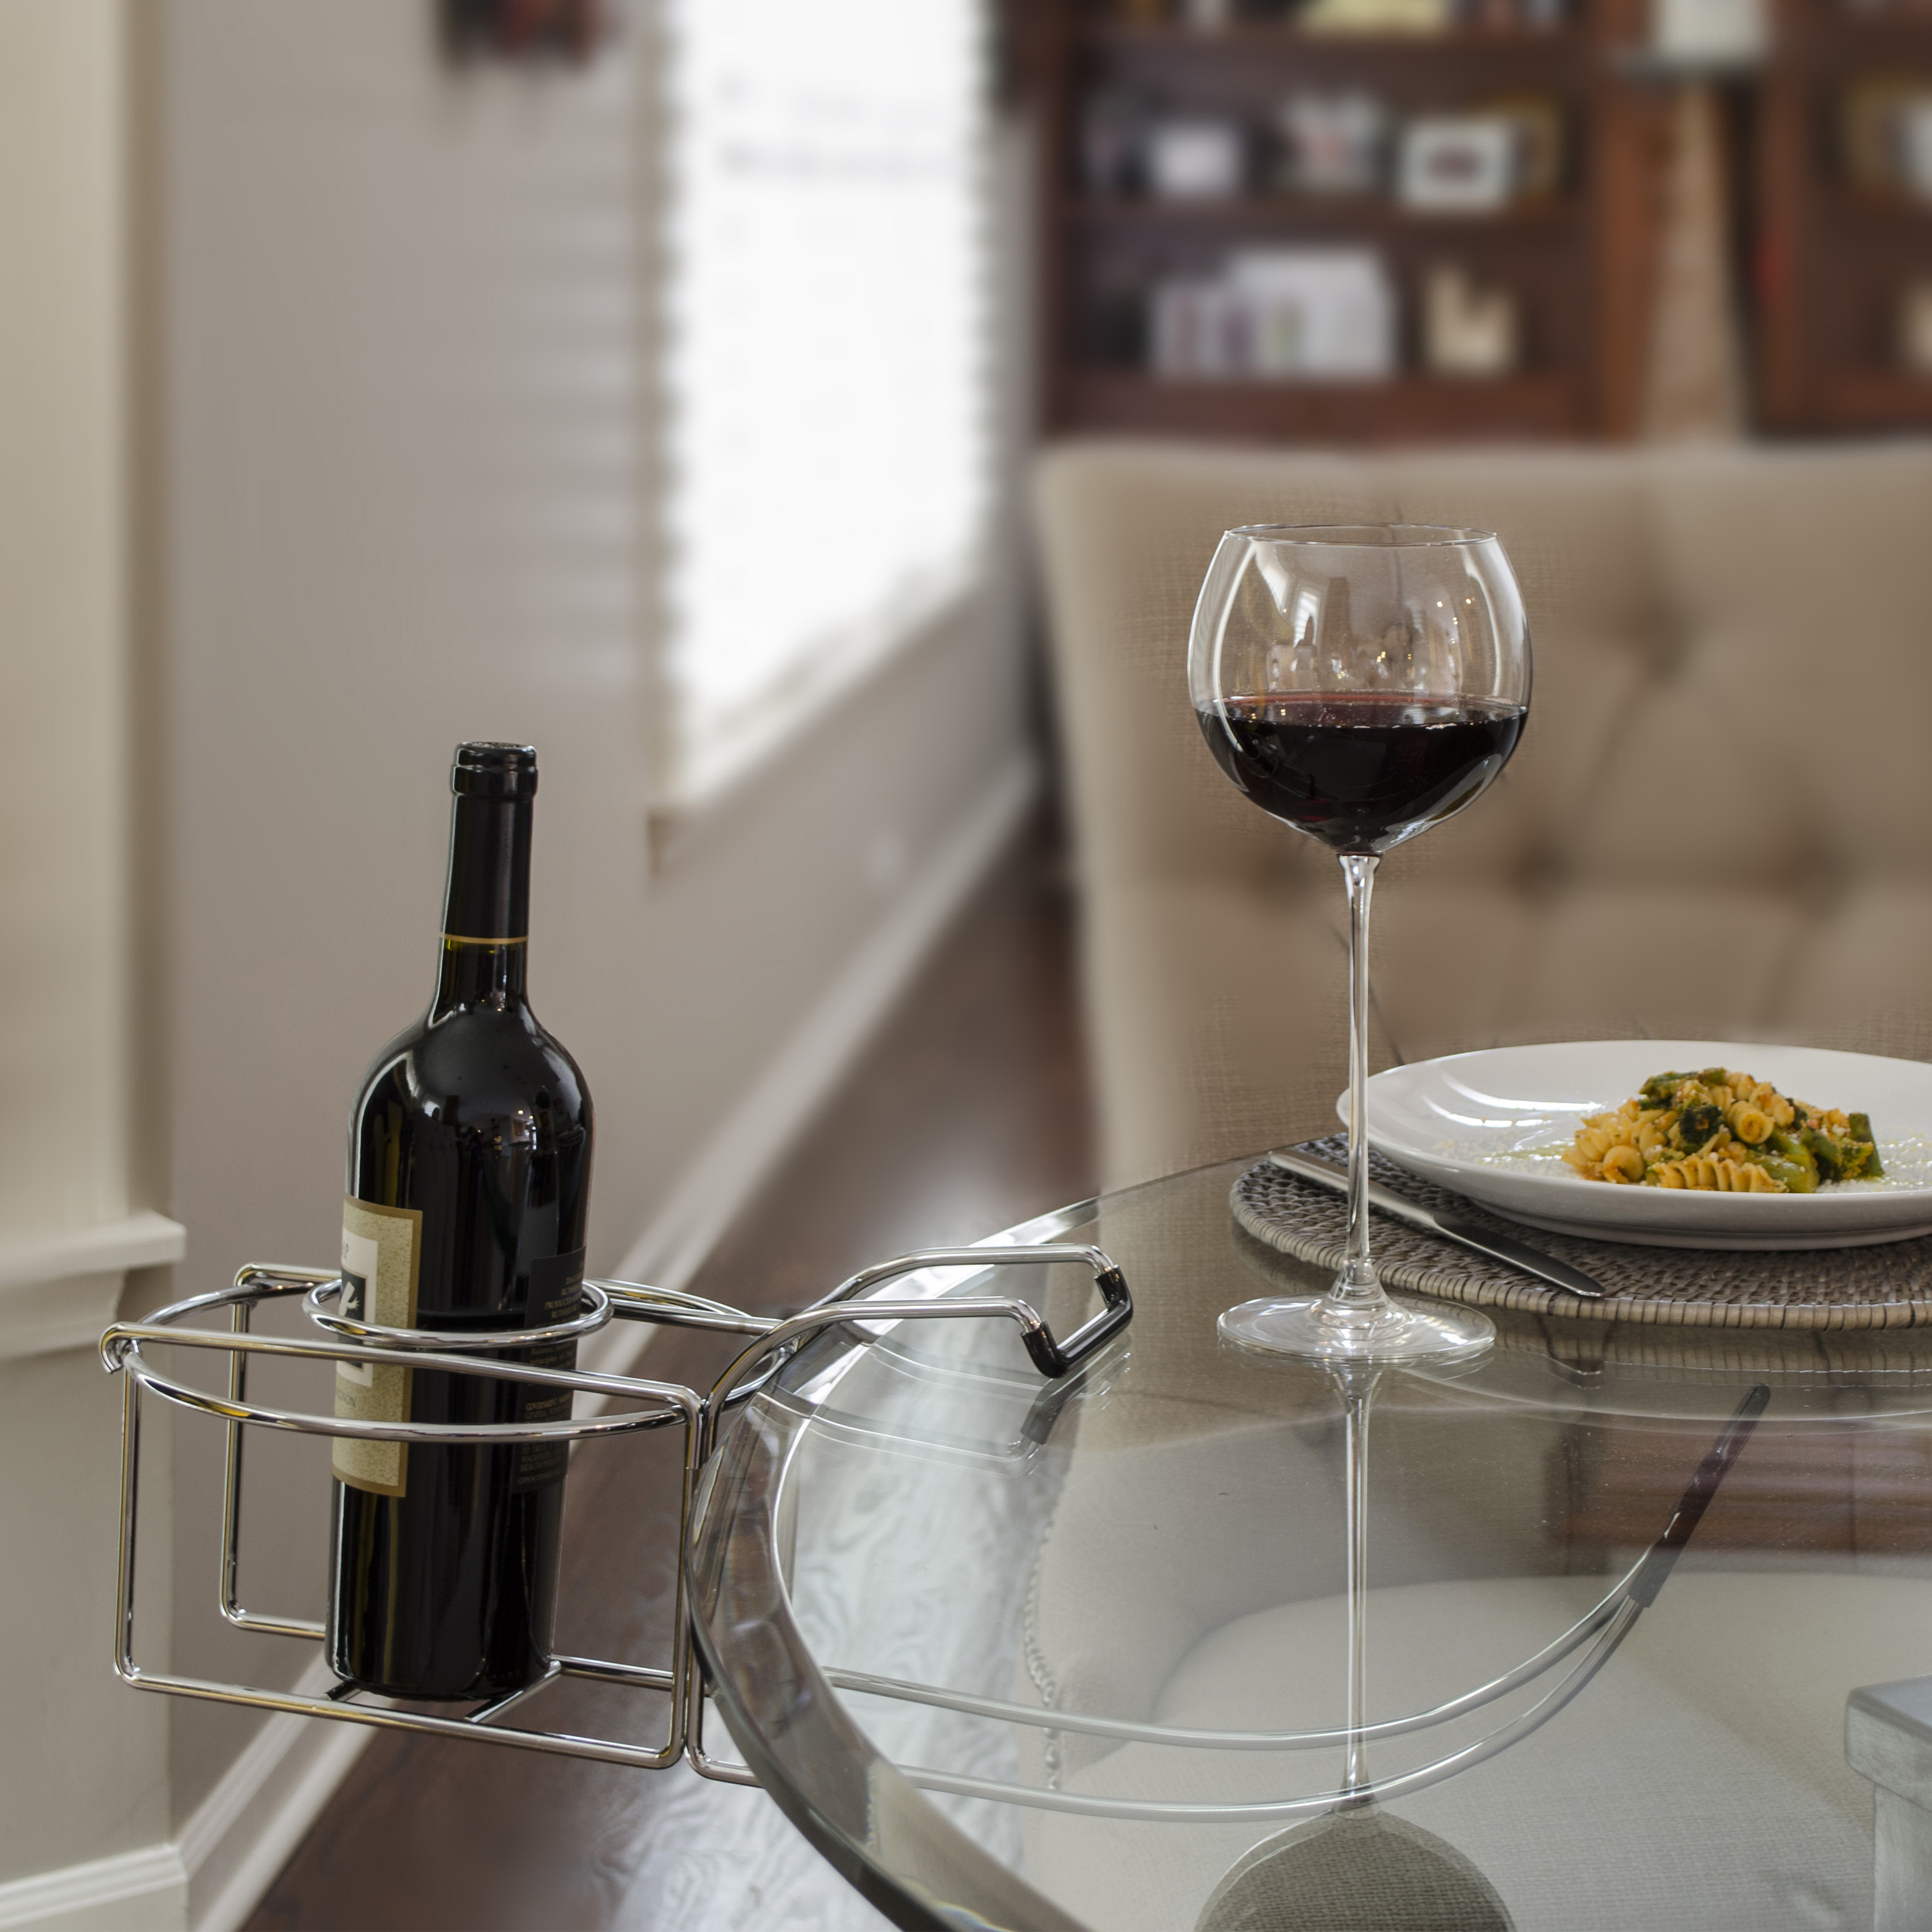 C-Line's Wine By Your Side 3-Piece Wine Holder Set